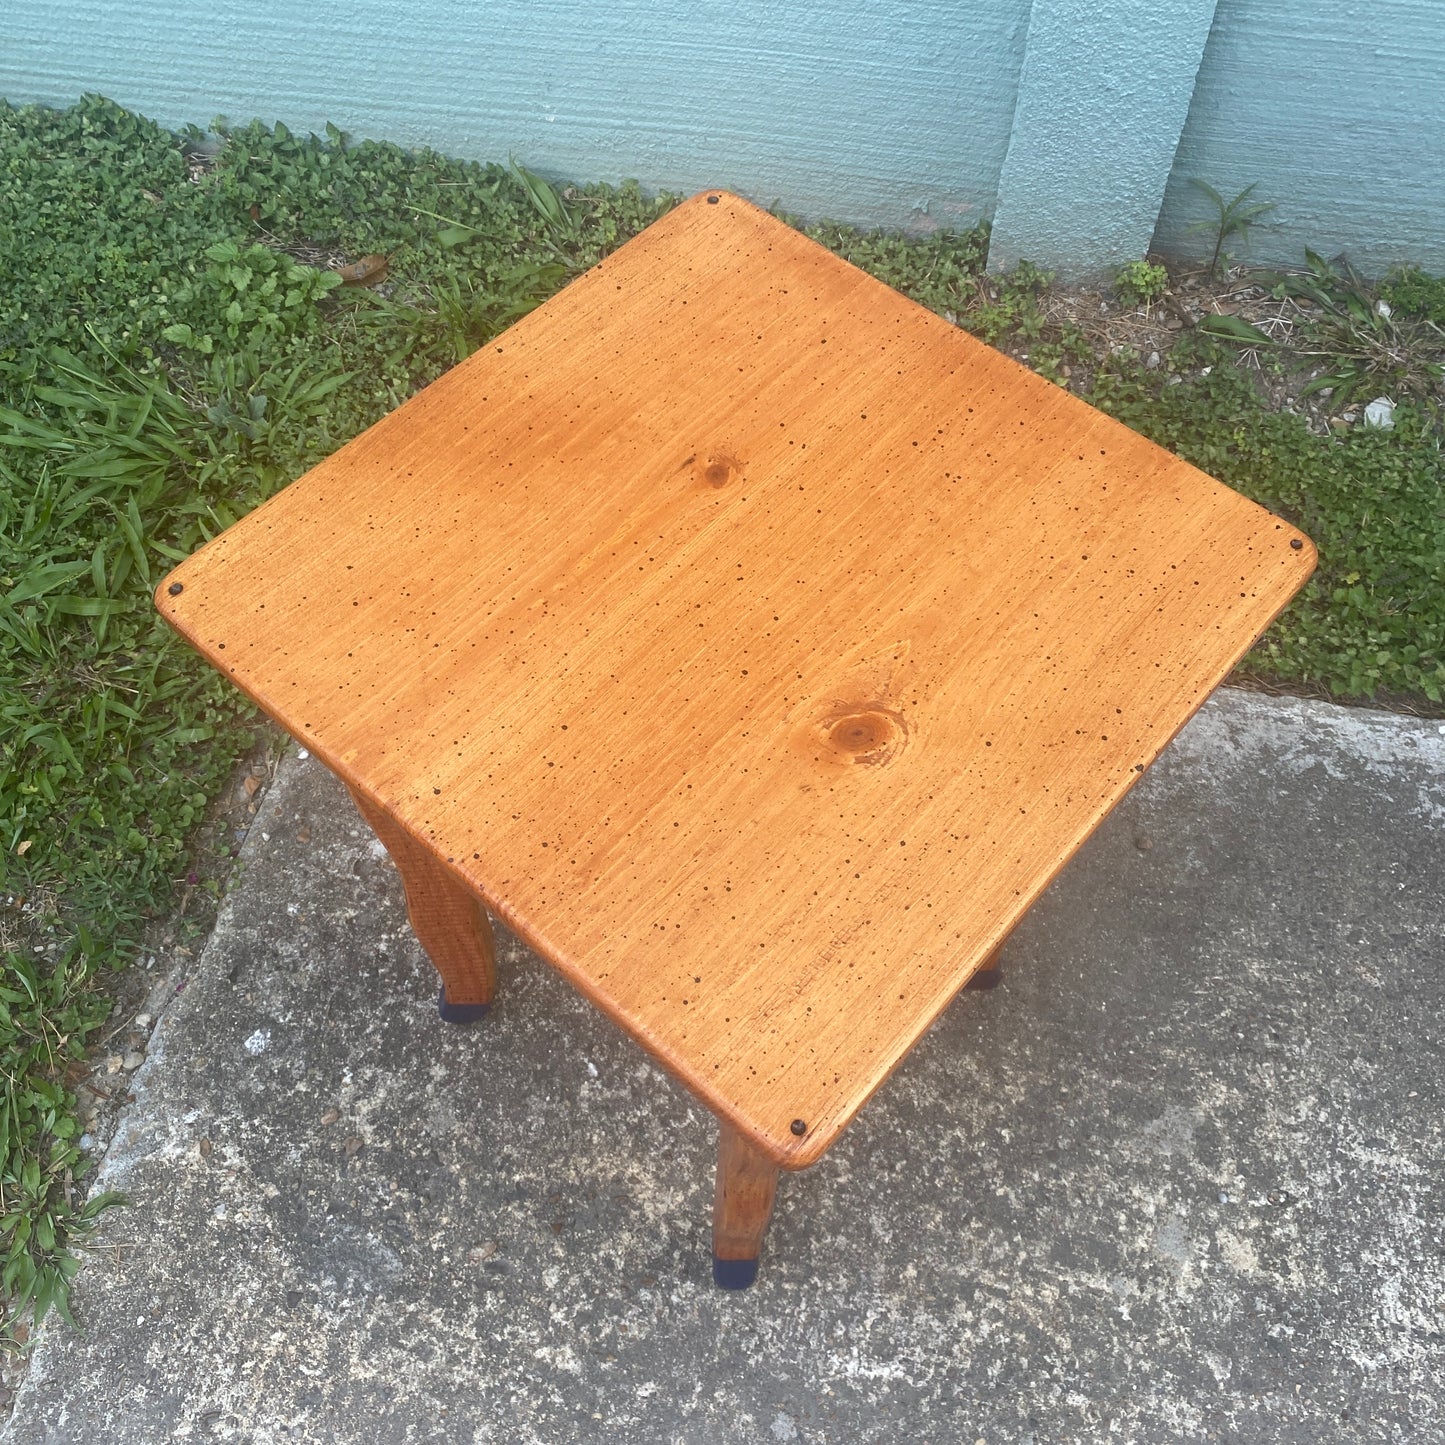 David Marsh 18” Square Side Table with Wiggle Legs